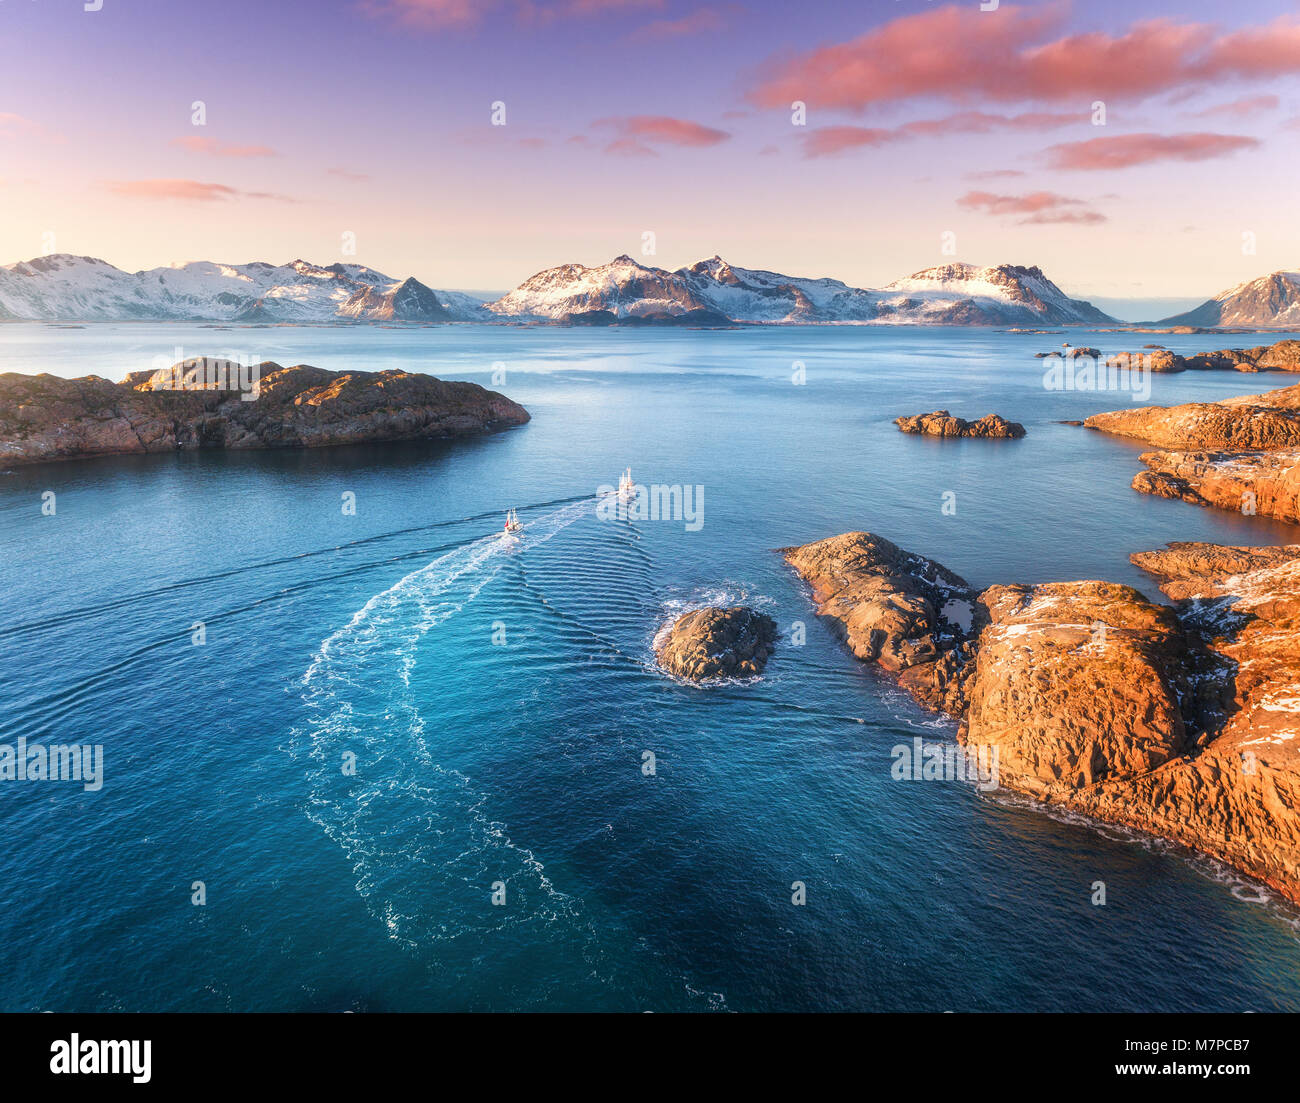 Aerial view of fishing boats, rocks in the blue sea, snowy mountains and colorful purple sky with red clouds at sunset in winter in Lofoten islands, N Stock Photo